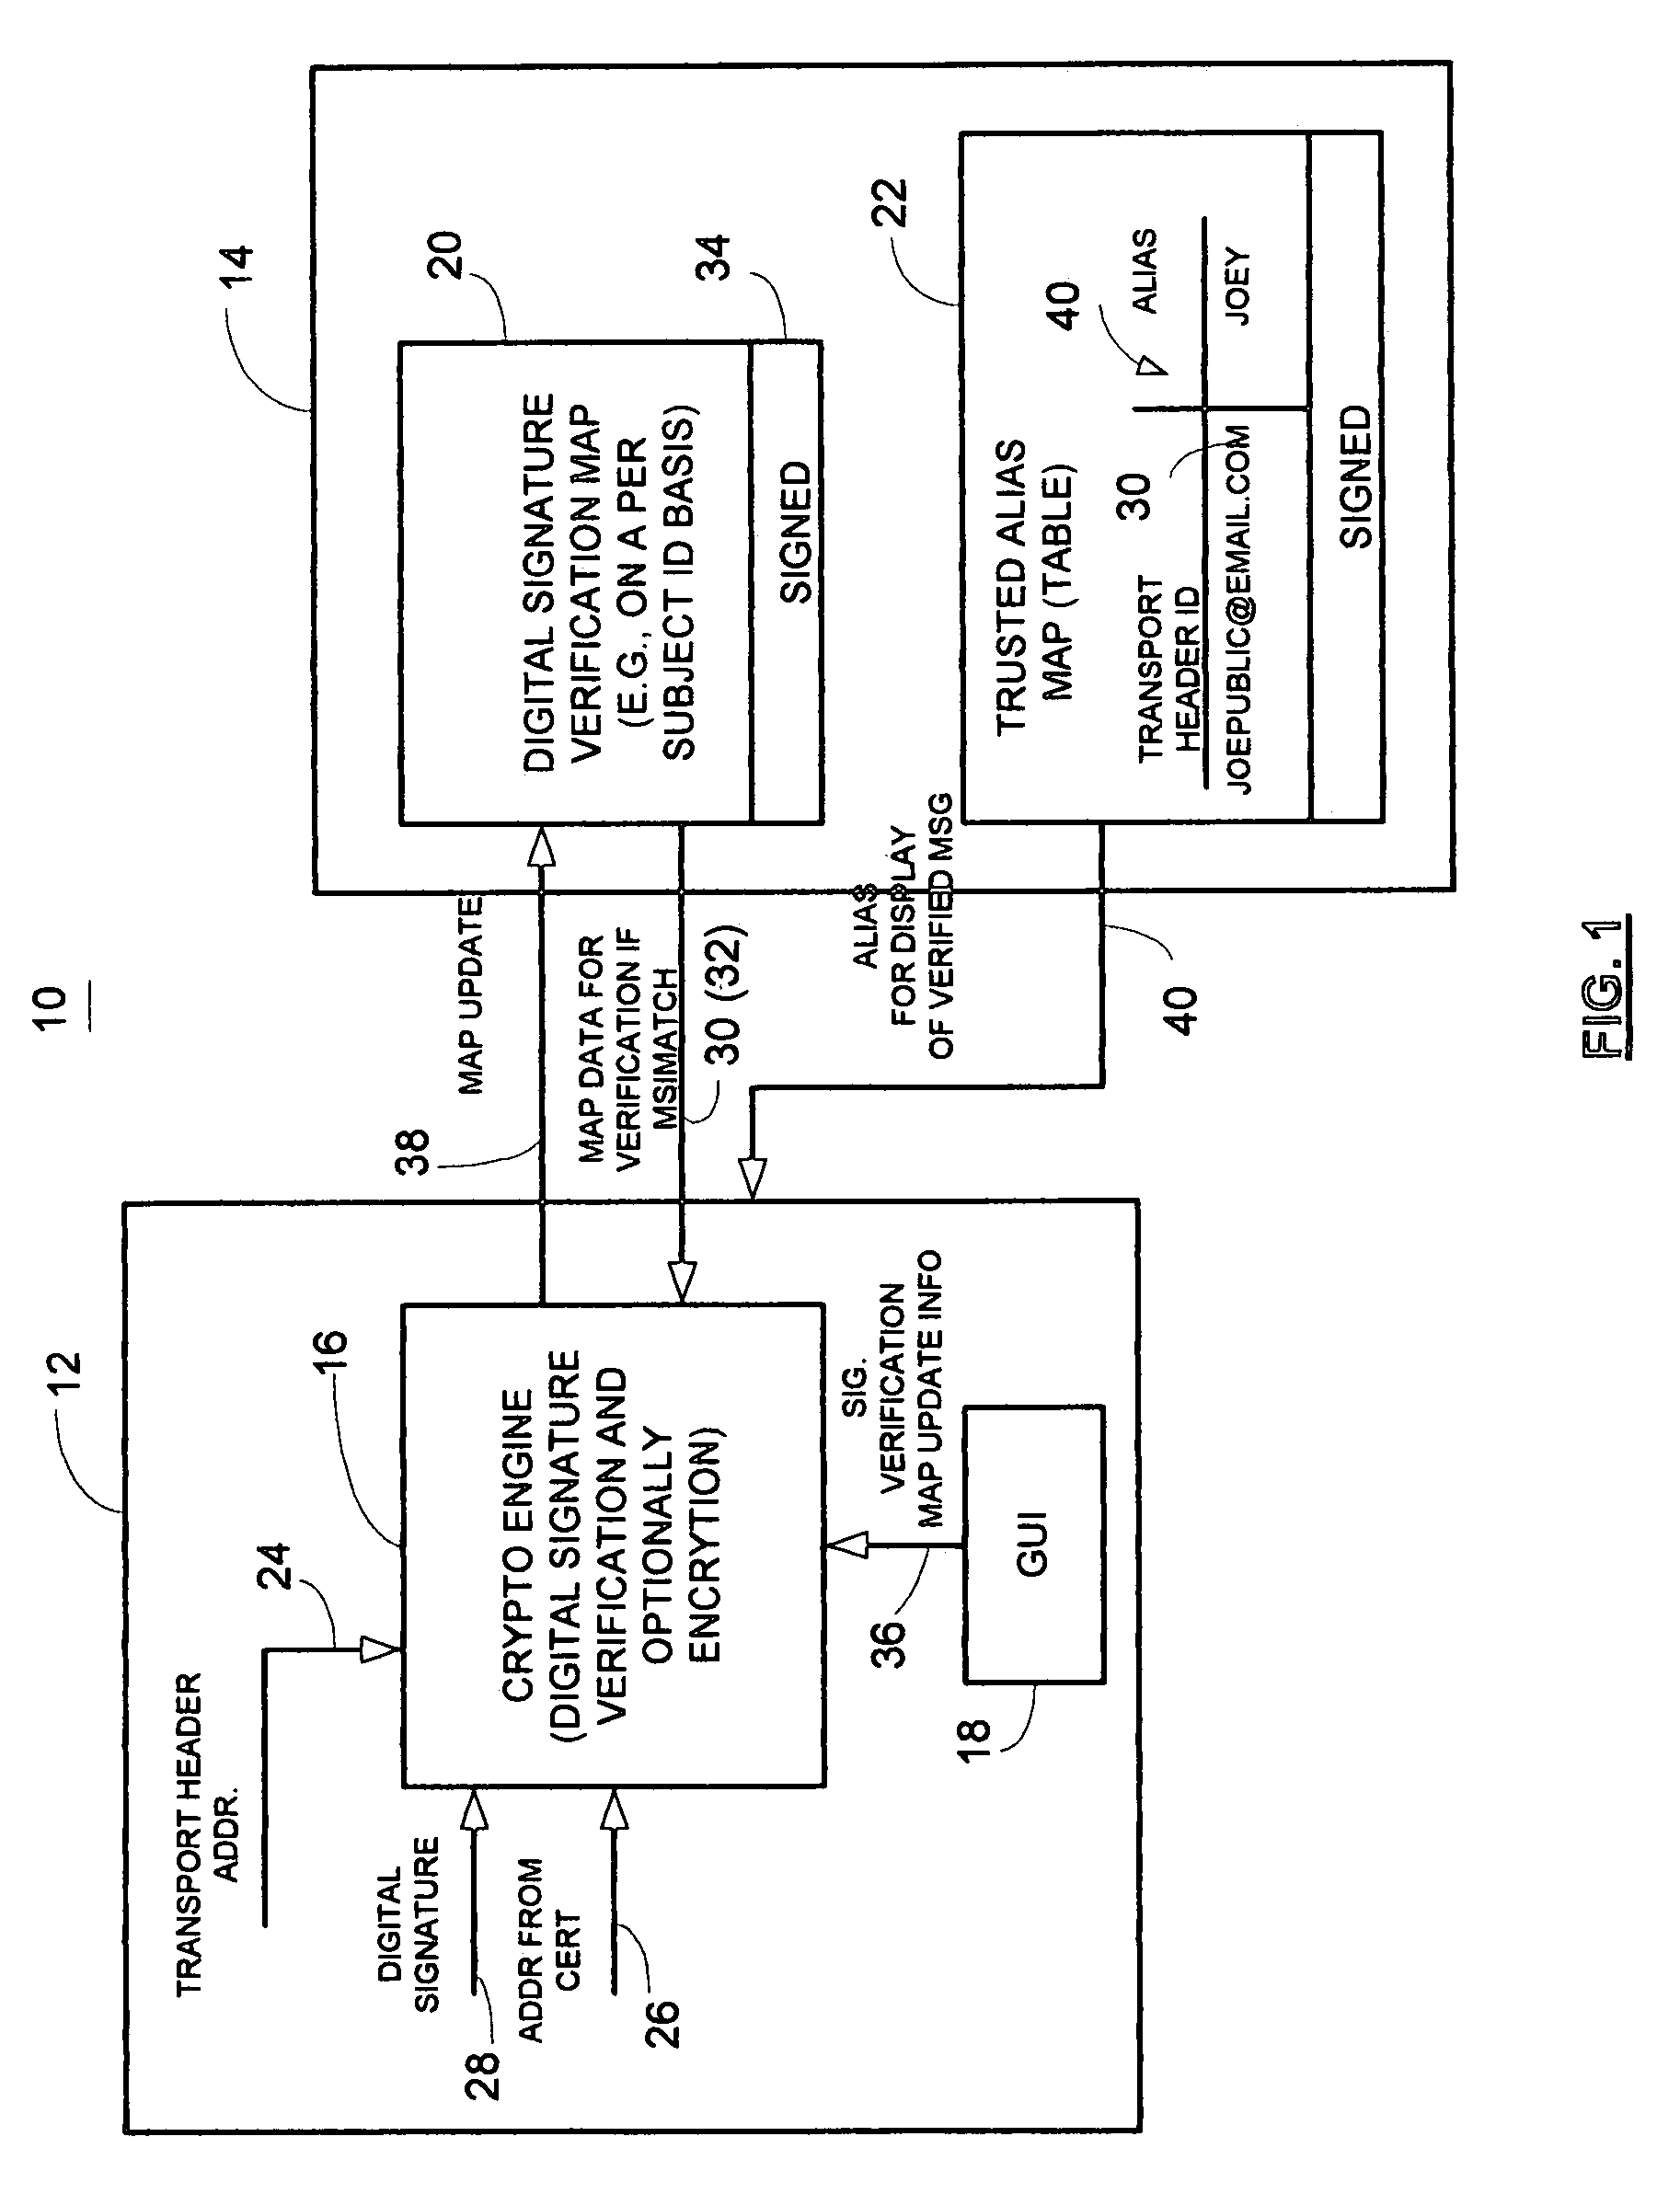 Method and apparatus for providing information security to prevent digital signature forgery